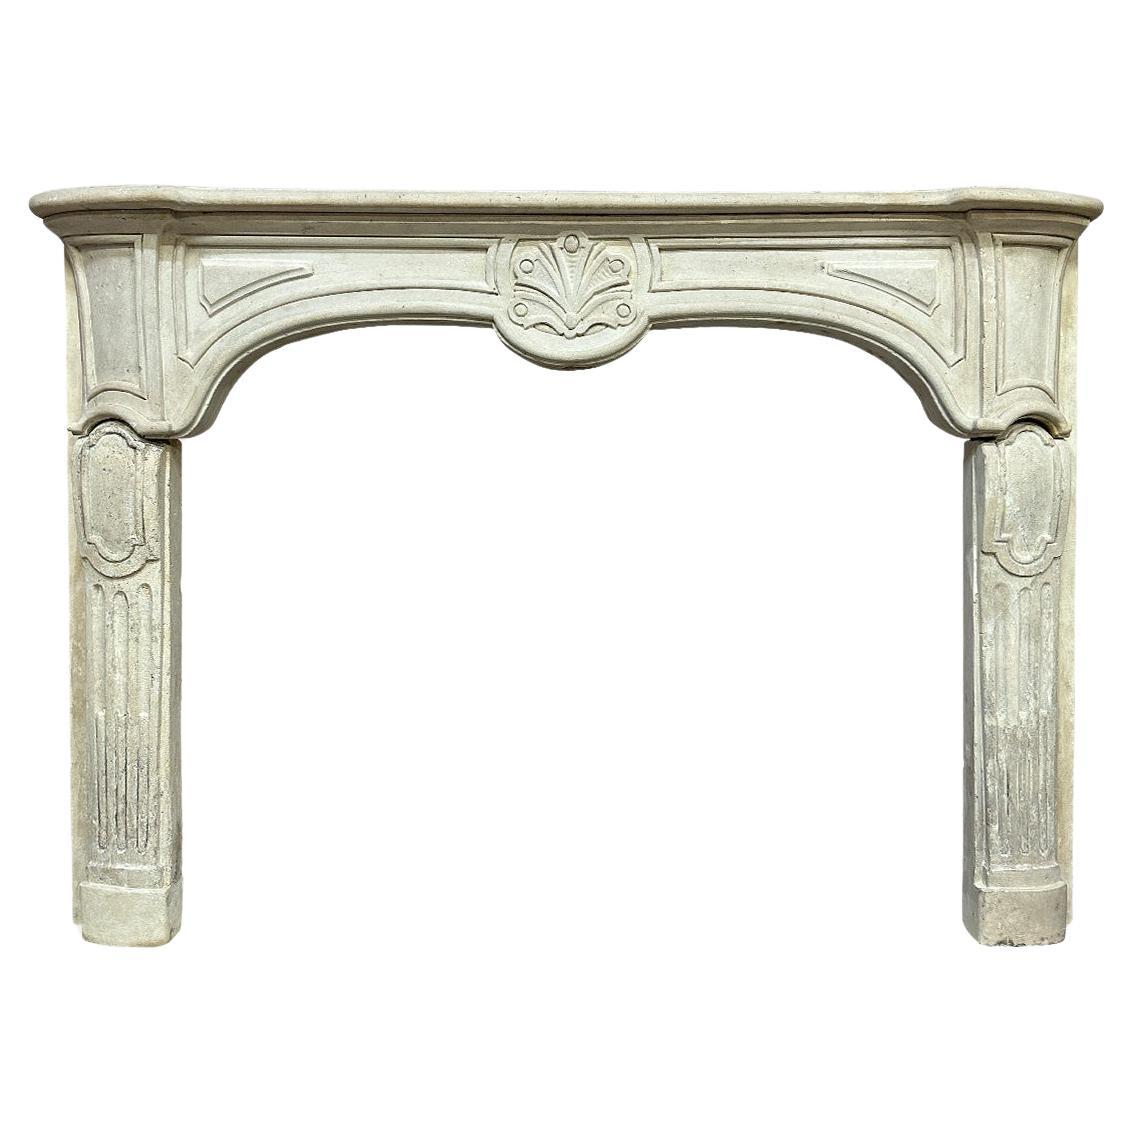 An Antique 18th century Provincial French Stone Fireplace Mantel  For Sale